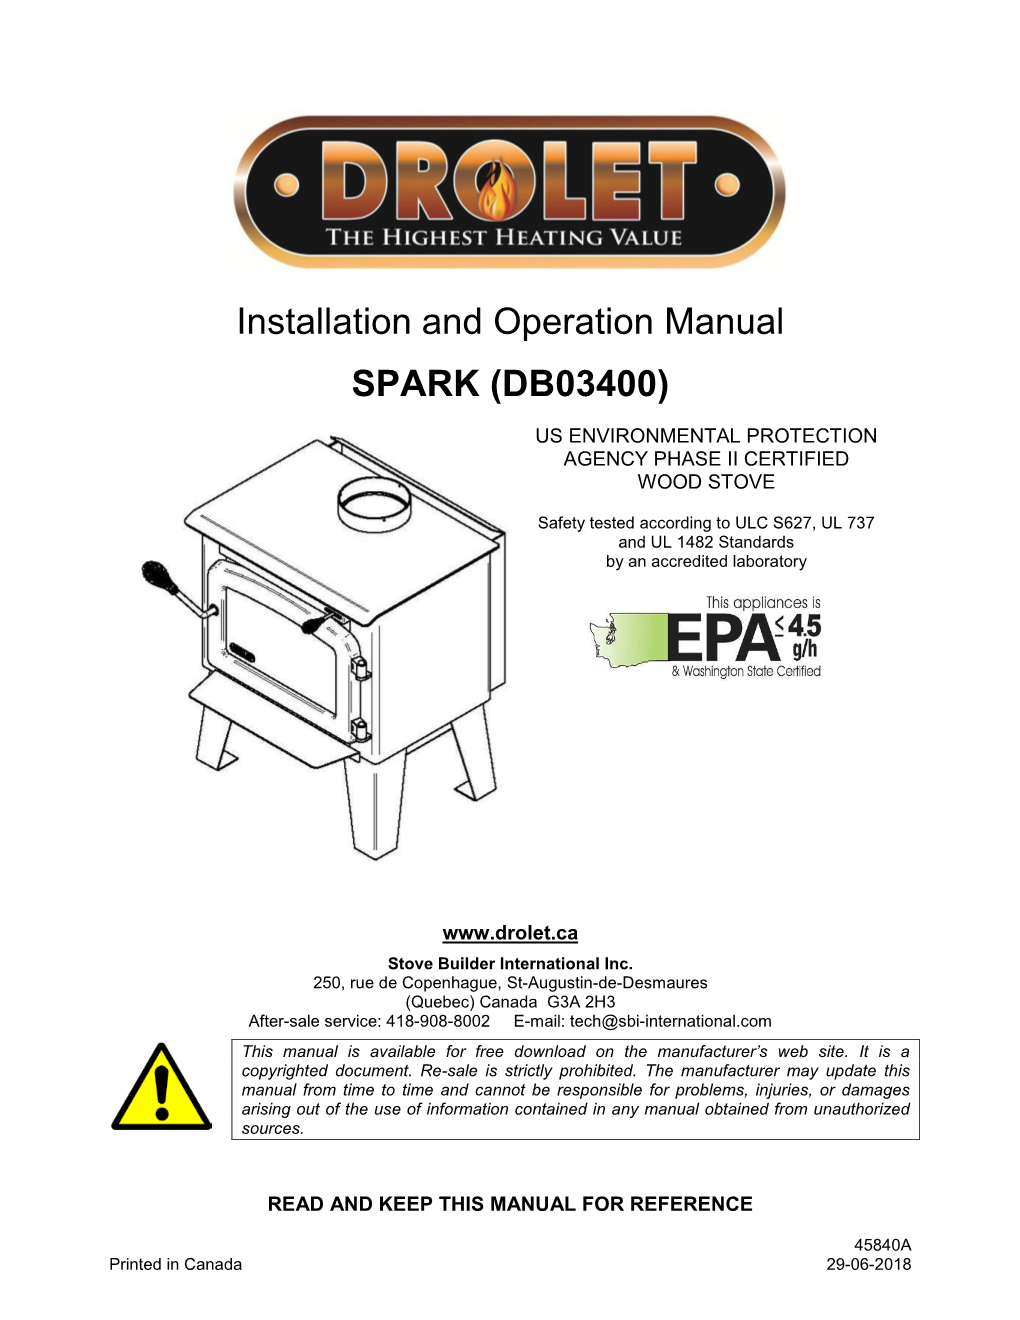 Installation and Operation Manual SPARK (DB03400) US ENVIRONMENTAL PROTECTION AGENCY PHASE II CERTIFIED WOOD STOVE